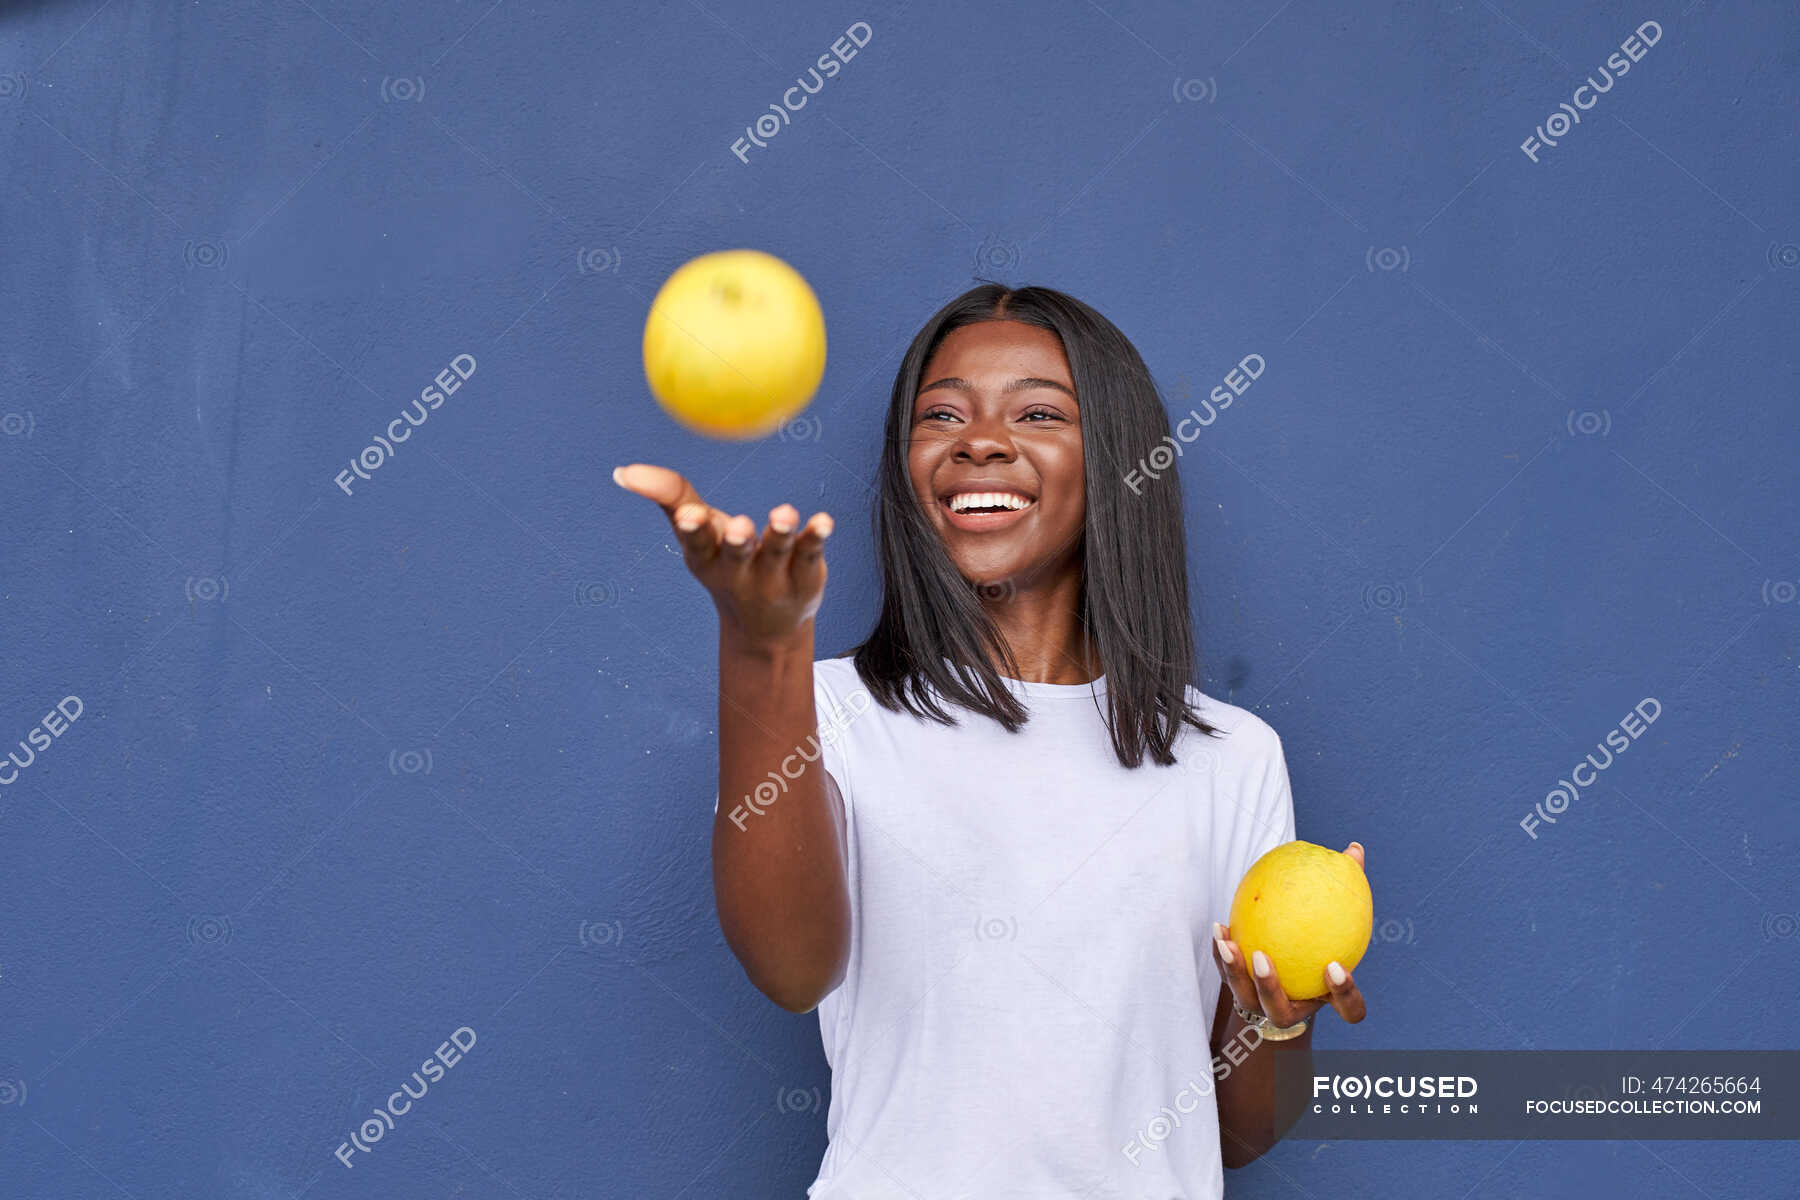 Juggling Photos, Download The BEST Free Juggling Stock Photos & HD Images